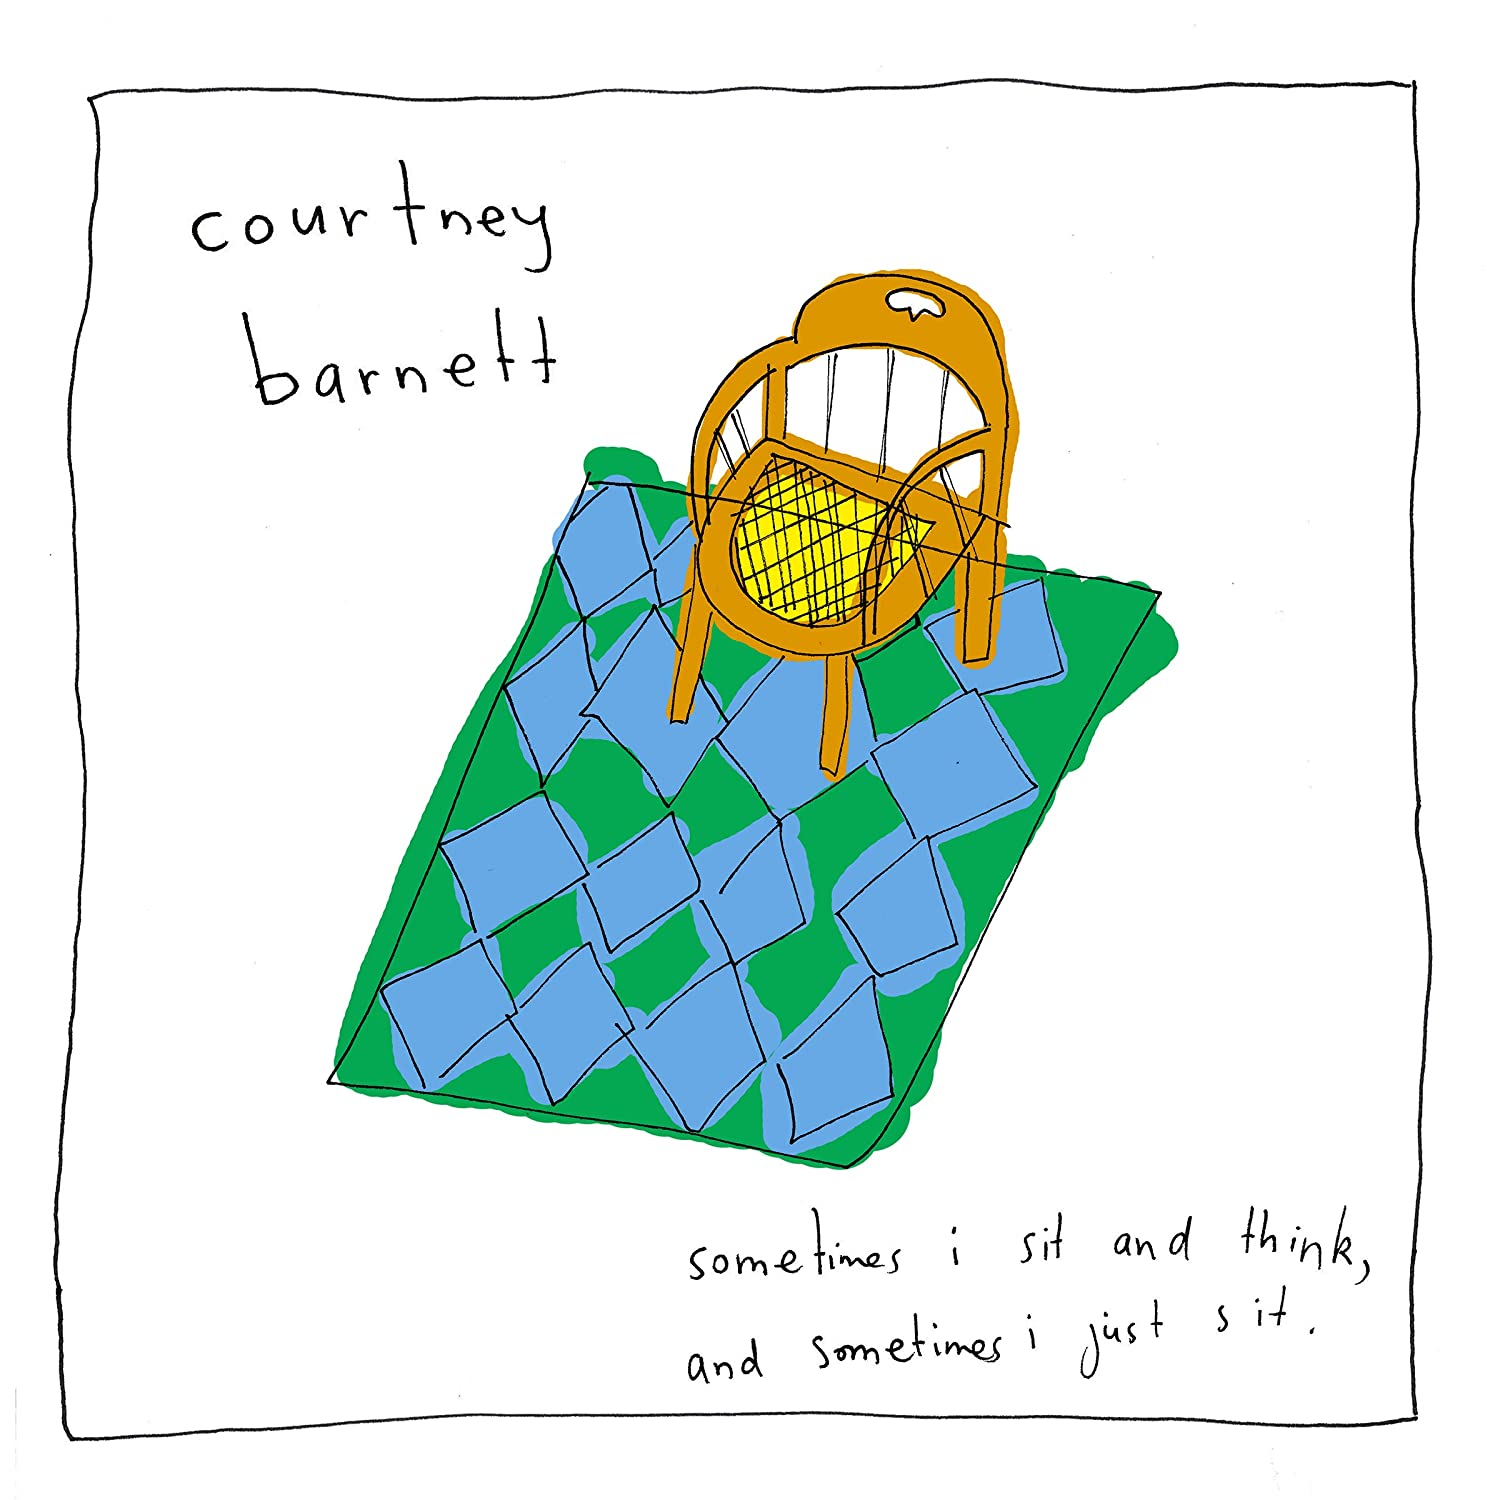 Courtney Barnett “Sometimes I Sit and Think and Sometimes I Just Sit” LP 1